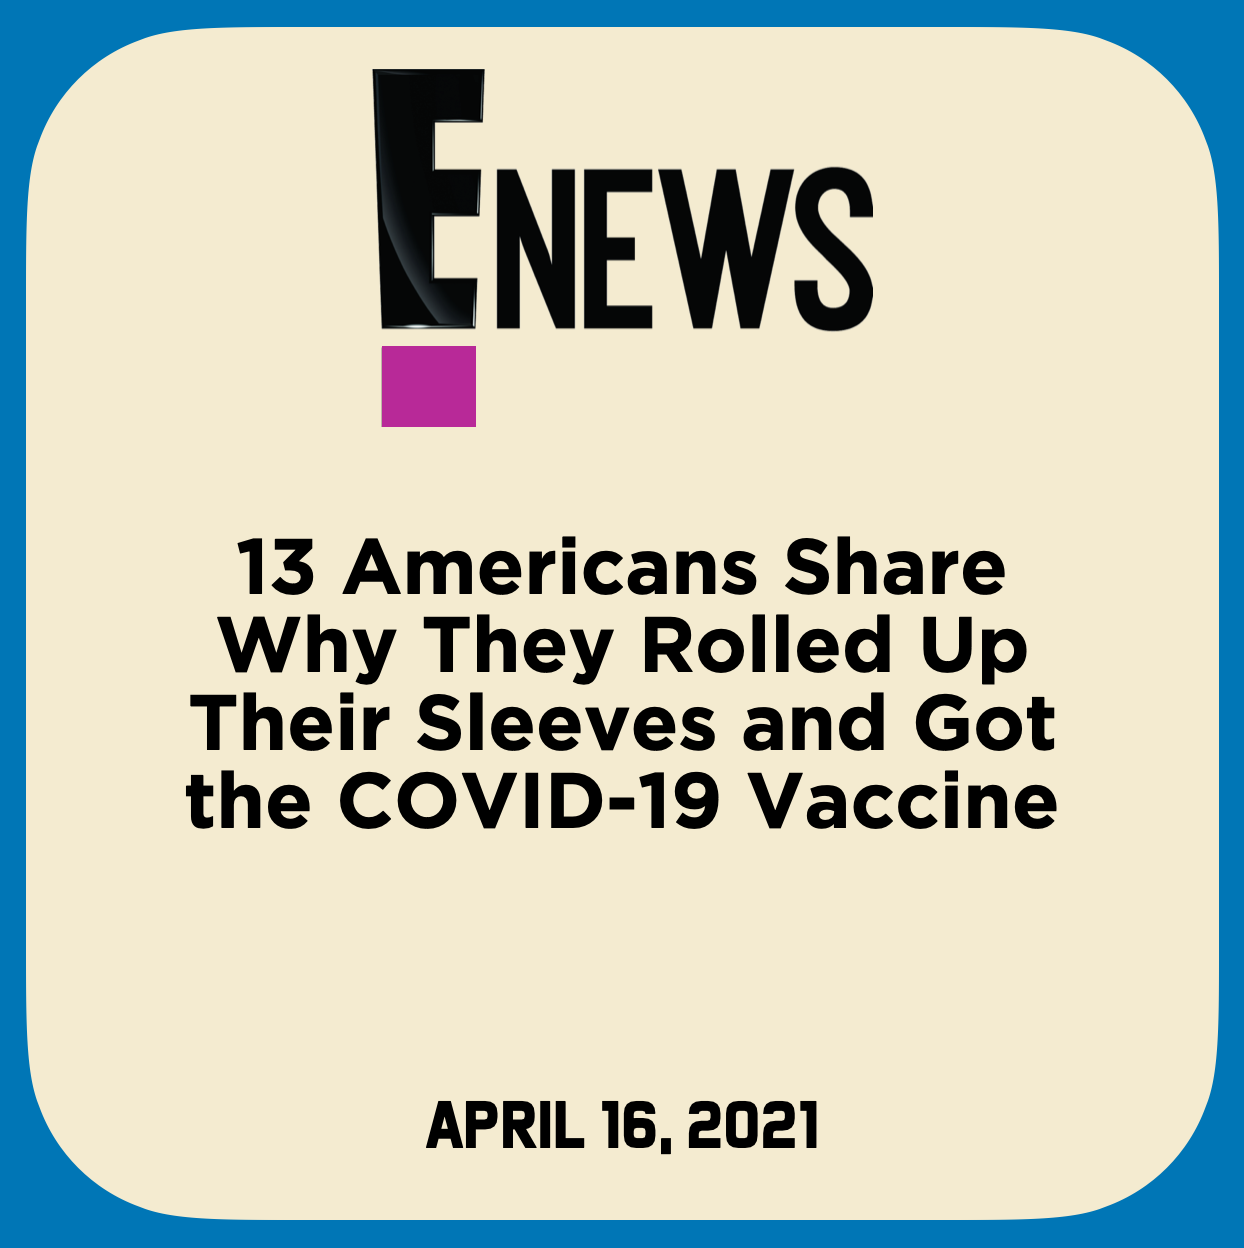 13 Americans Share Why They Rolled Up Their Sleeves and Got the COVID-19 Vaccine